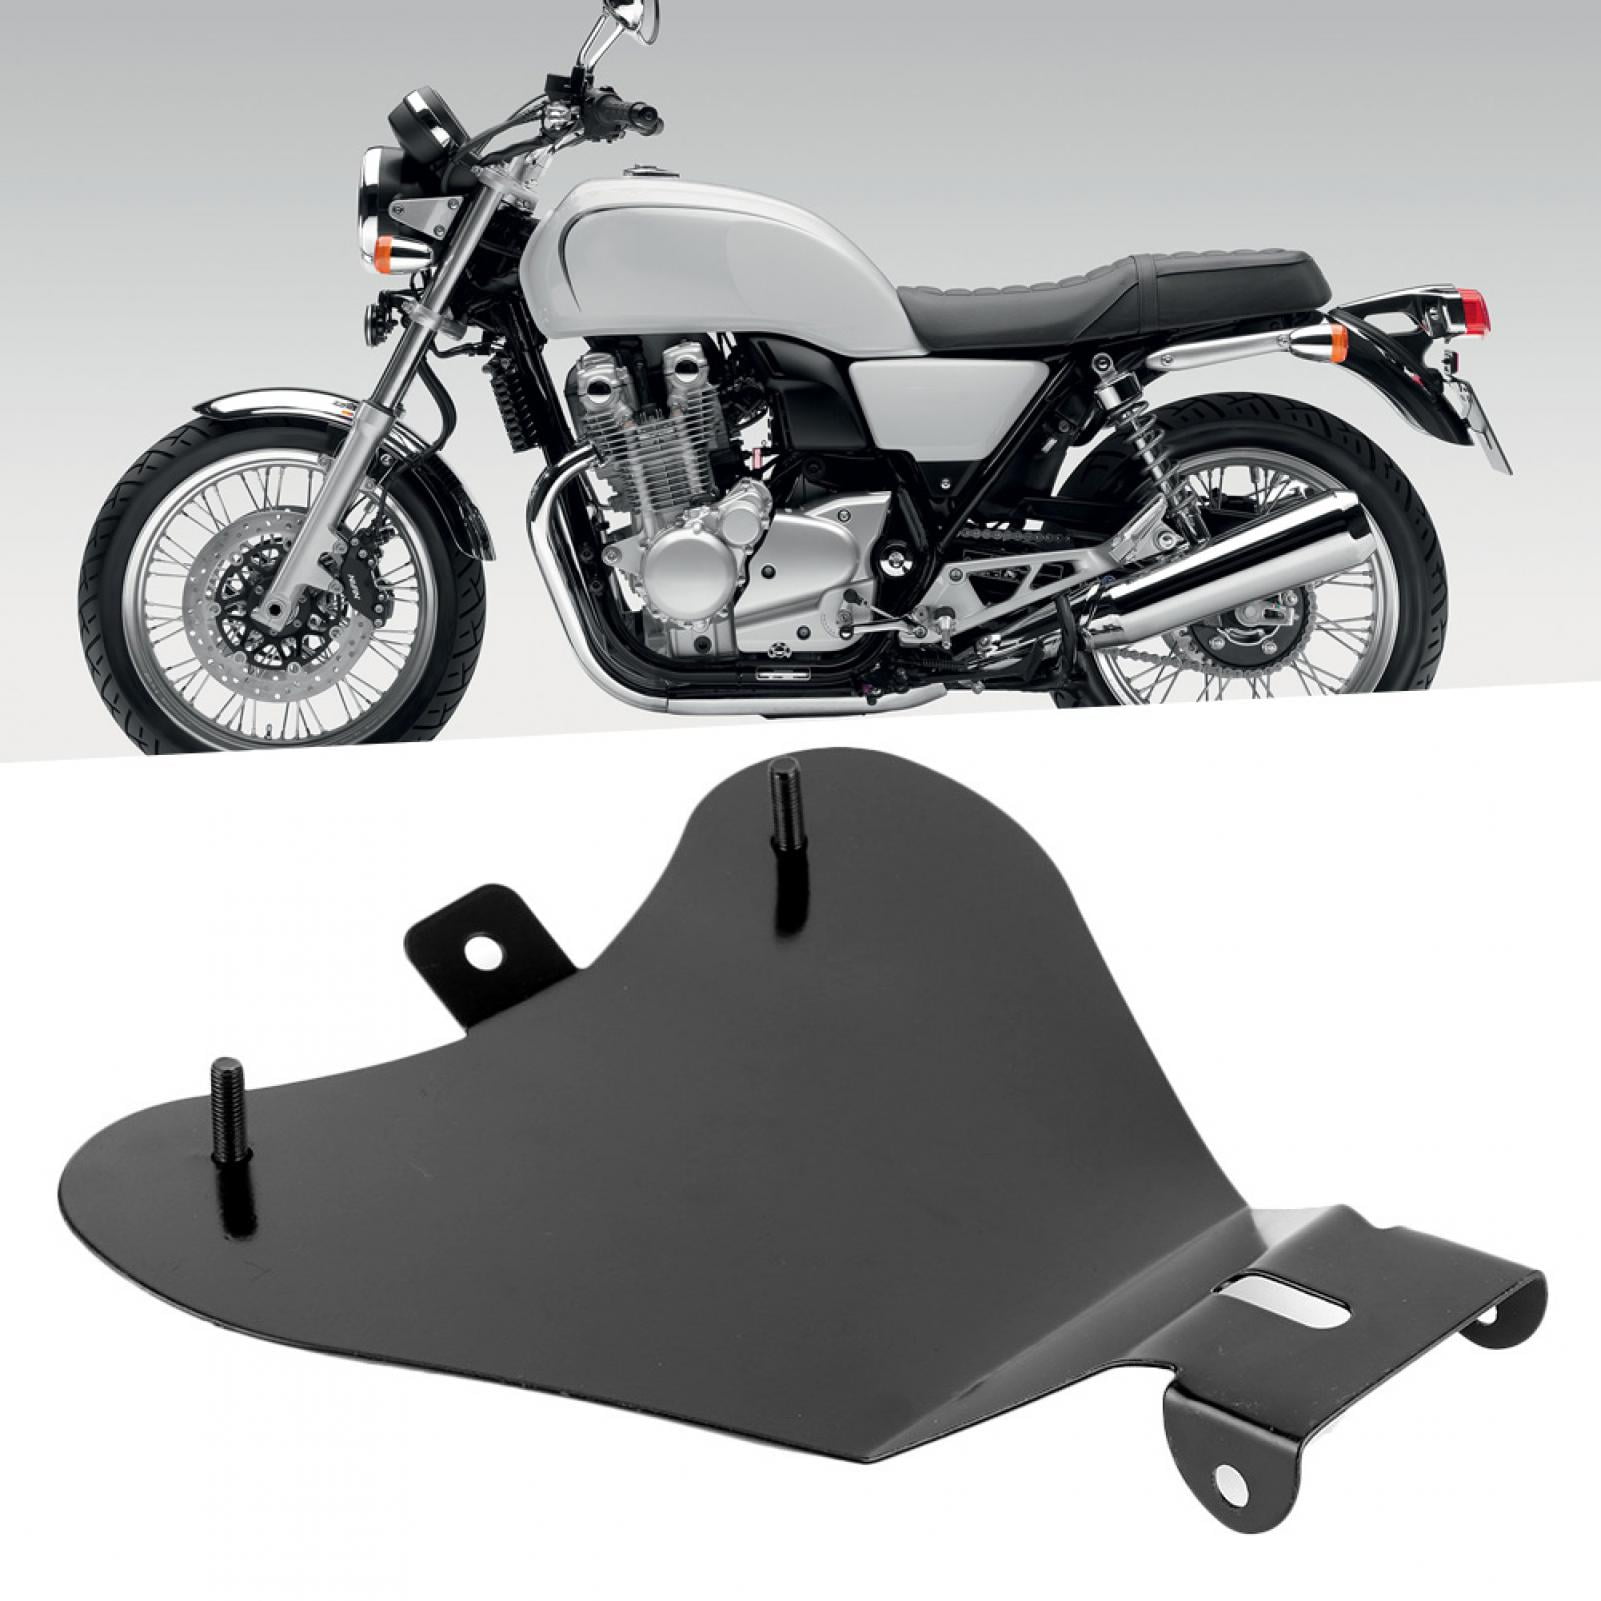 Motorcycle Solo Seat Spring Bracket Mounting Kit Fit for Harley Chopper Customs